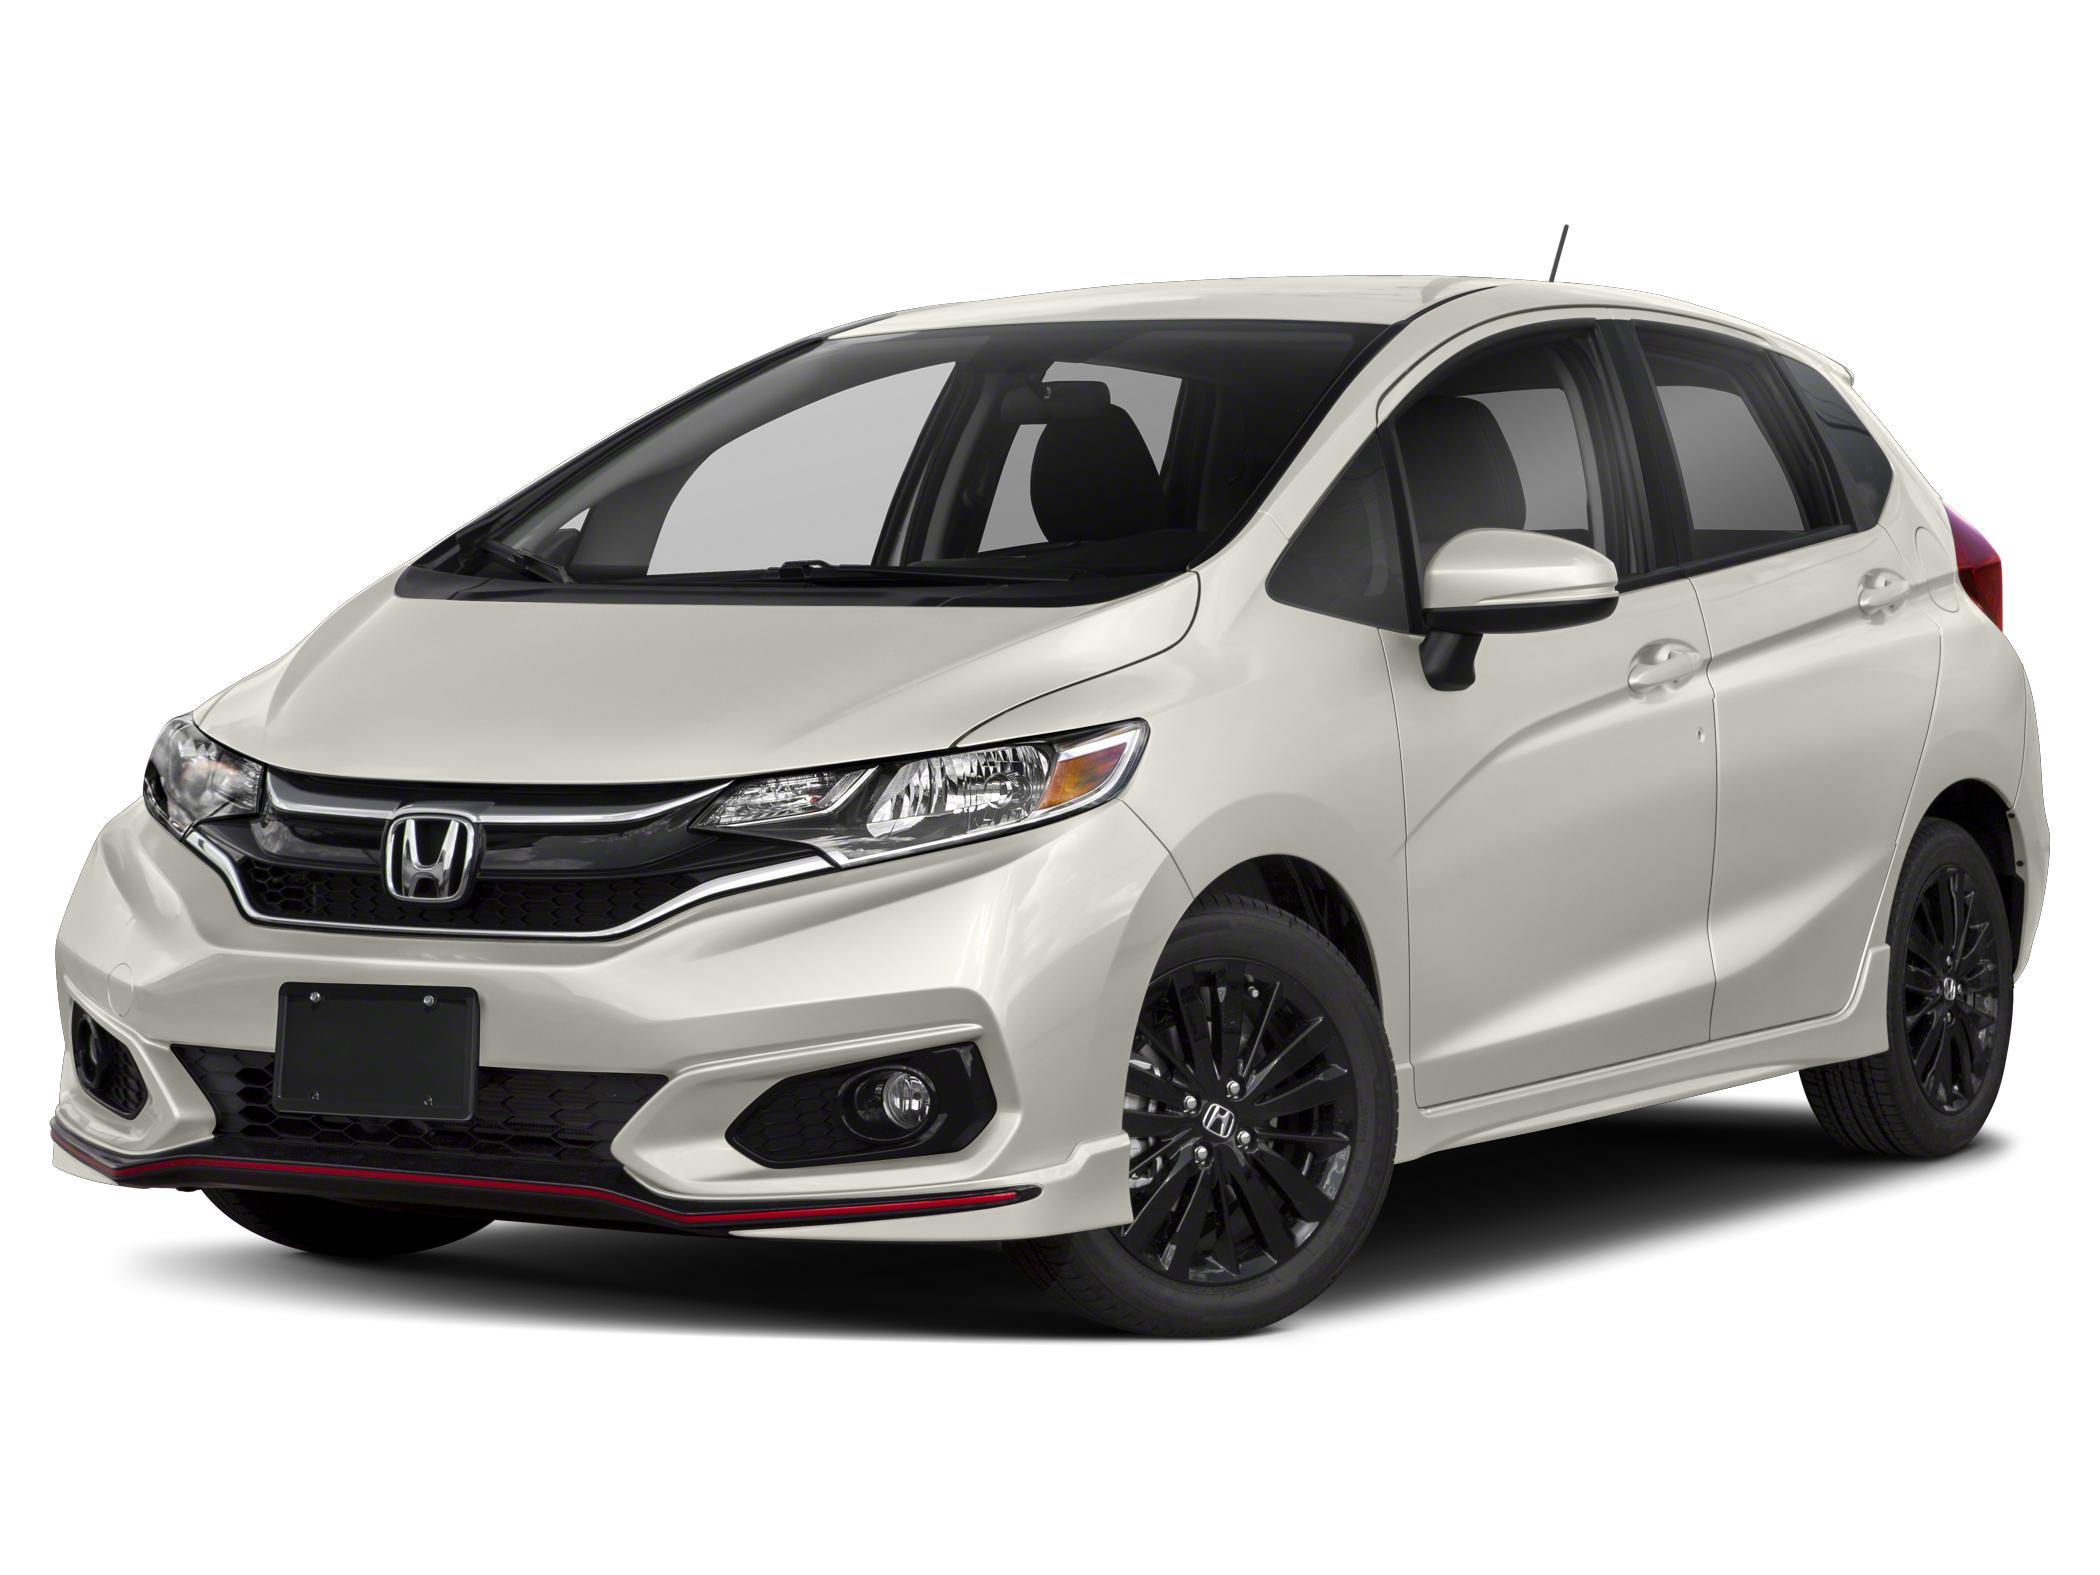 2020 Honda Fit Reviews, Price, MPG and More | Capital One Auto Navigator